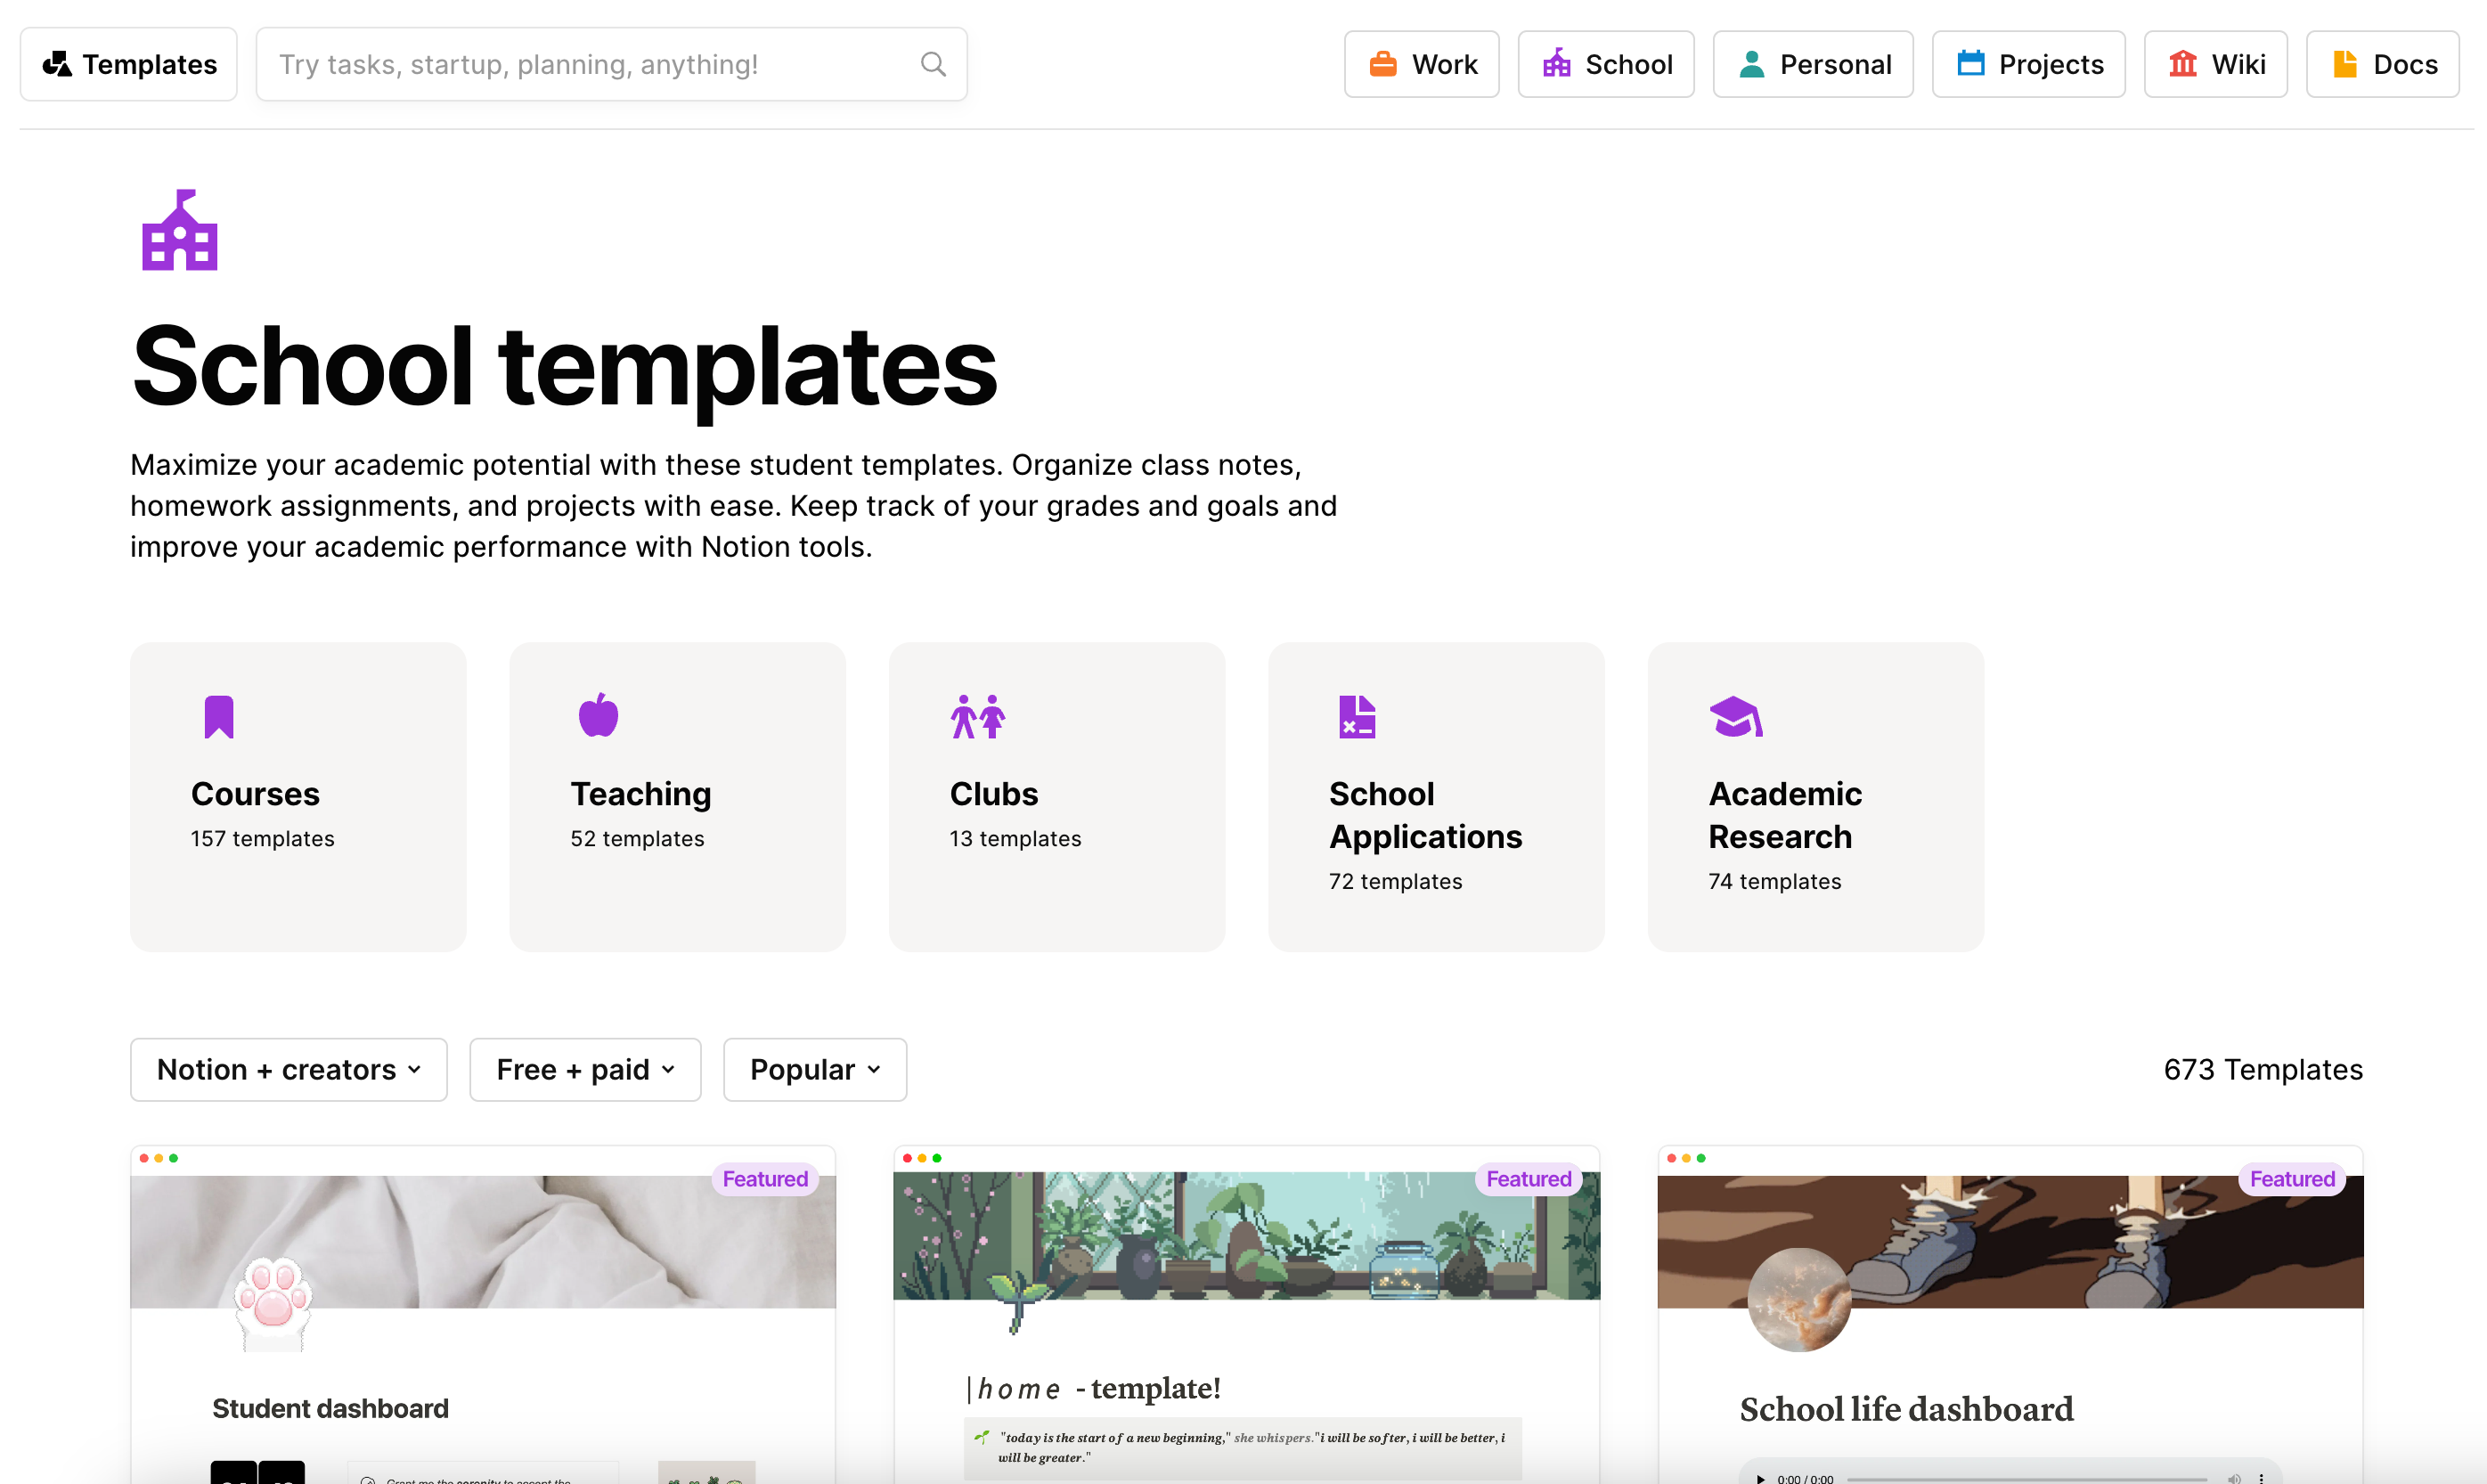 We're adding tons of new templates to help you easily get started with Notion.